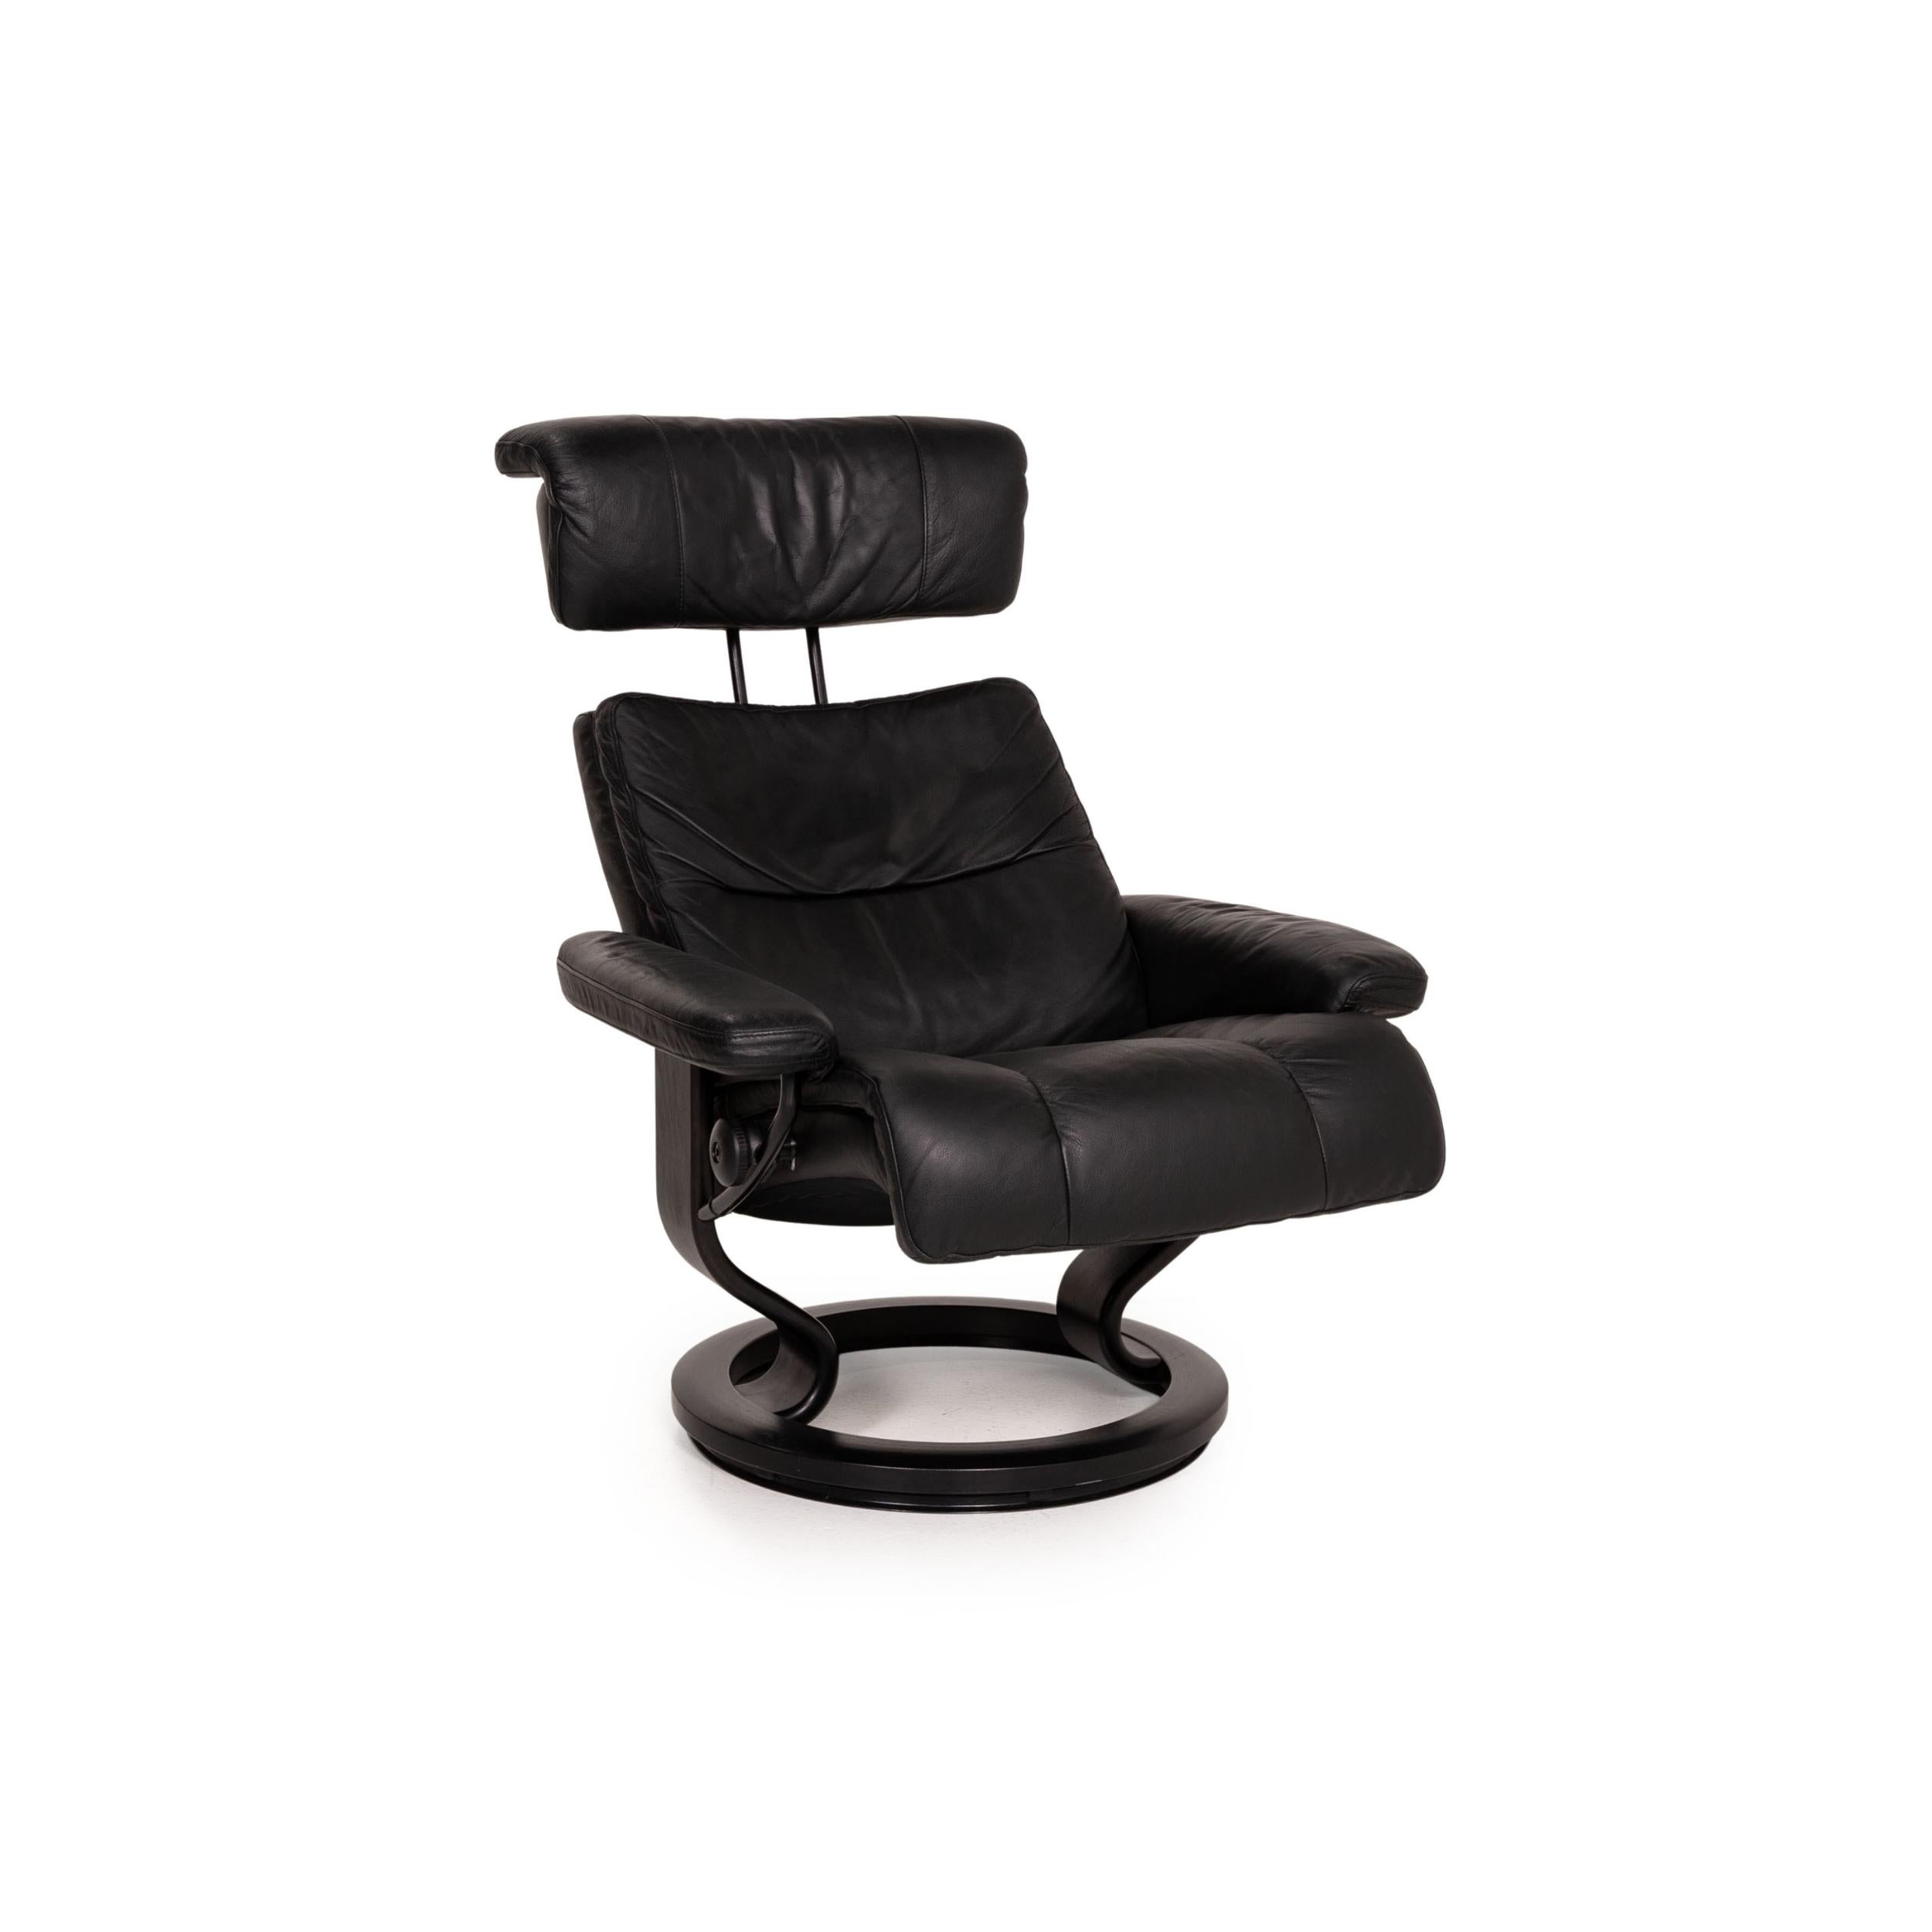 Modern Stressless Memphis Leather Armchair Size M Incl. Black Stool Function Relax